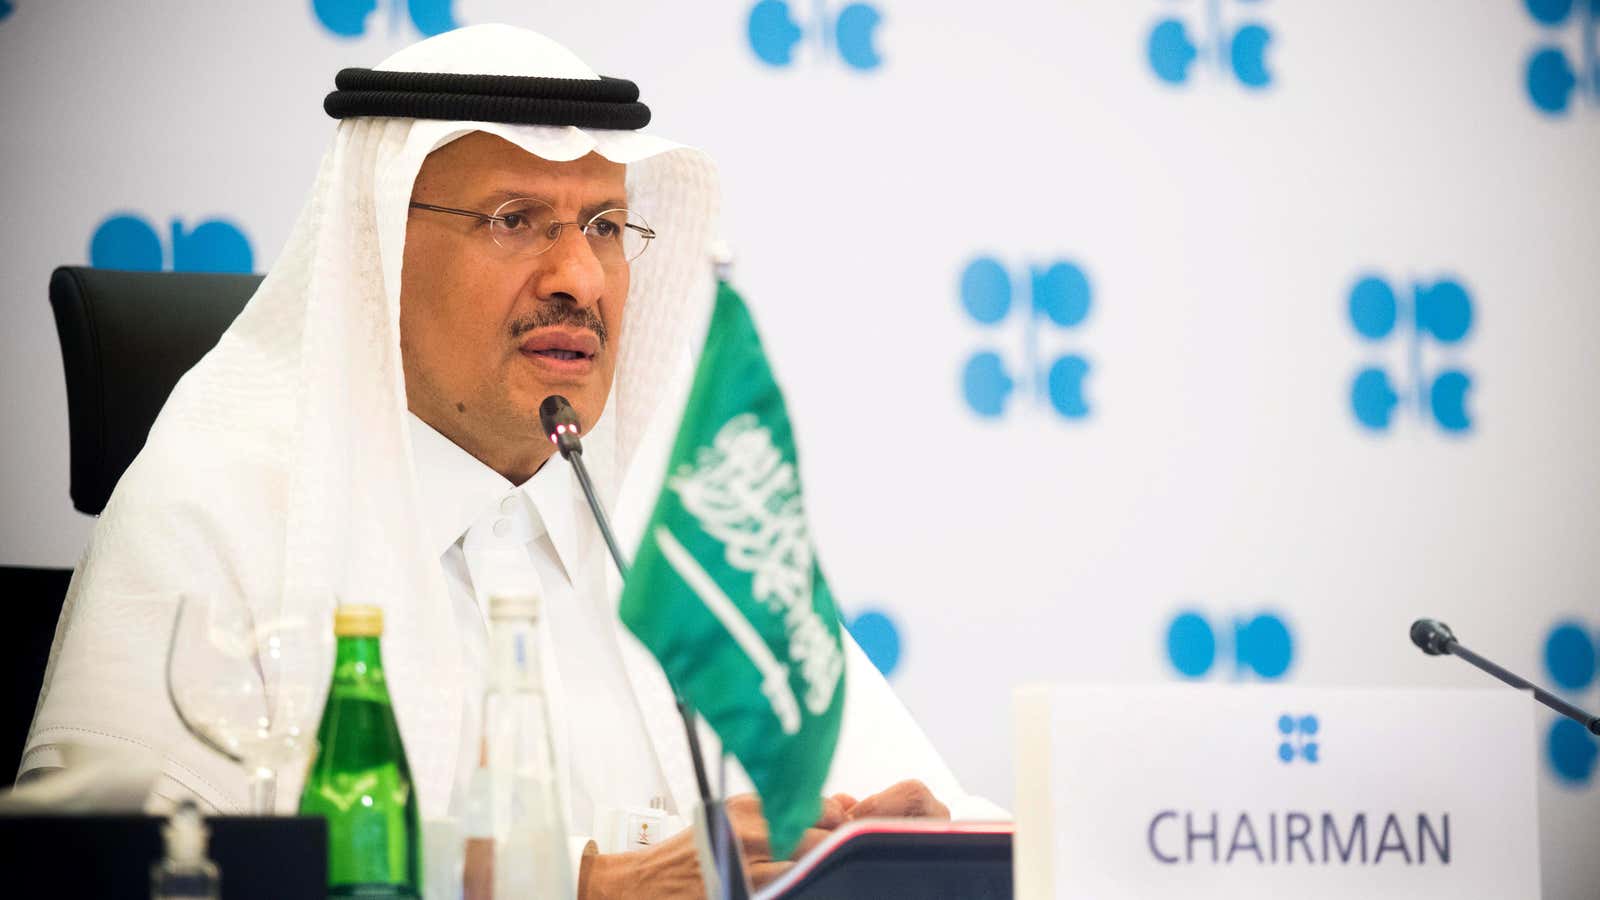 Saudi Arabia, which leads OPEC, has pushed for oil production cuts throughout the pandemic.